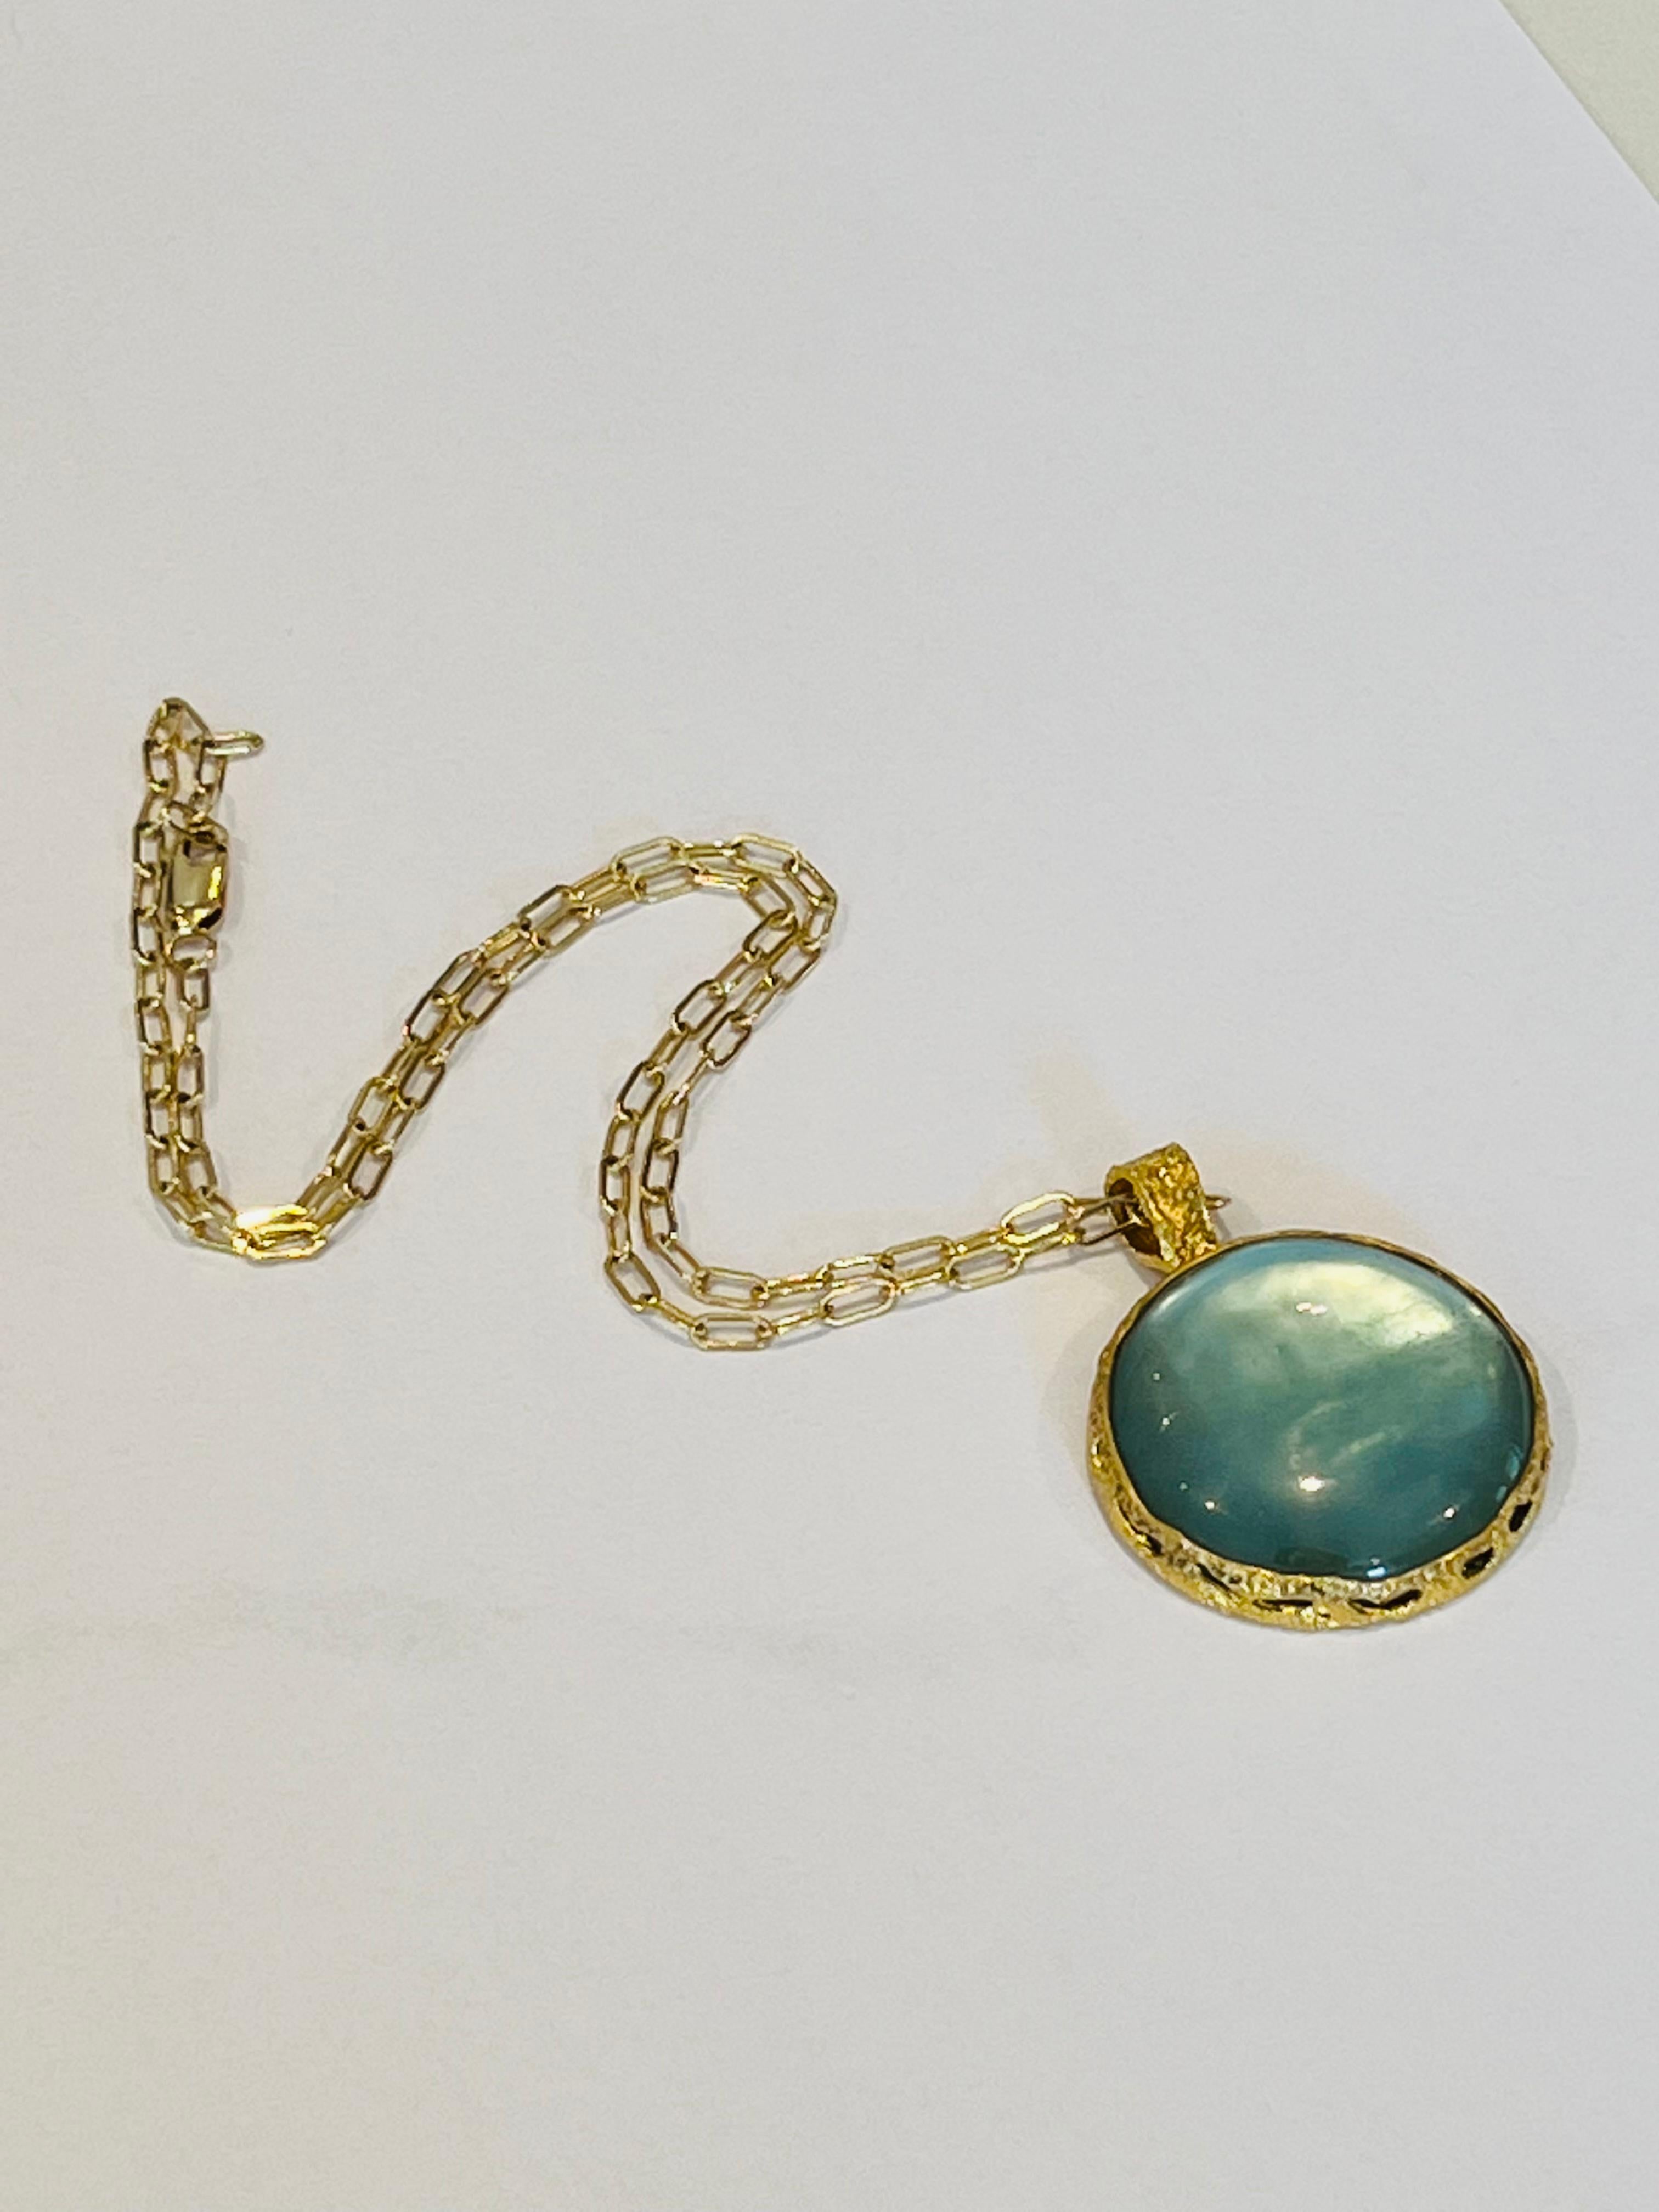 Celeste Reversible Aqua and Mother of Pearl Pendant in 22k Gold, by Tagili 4